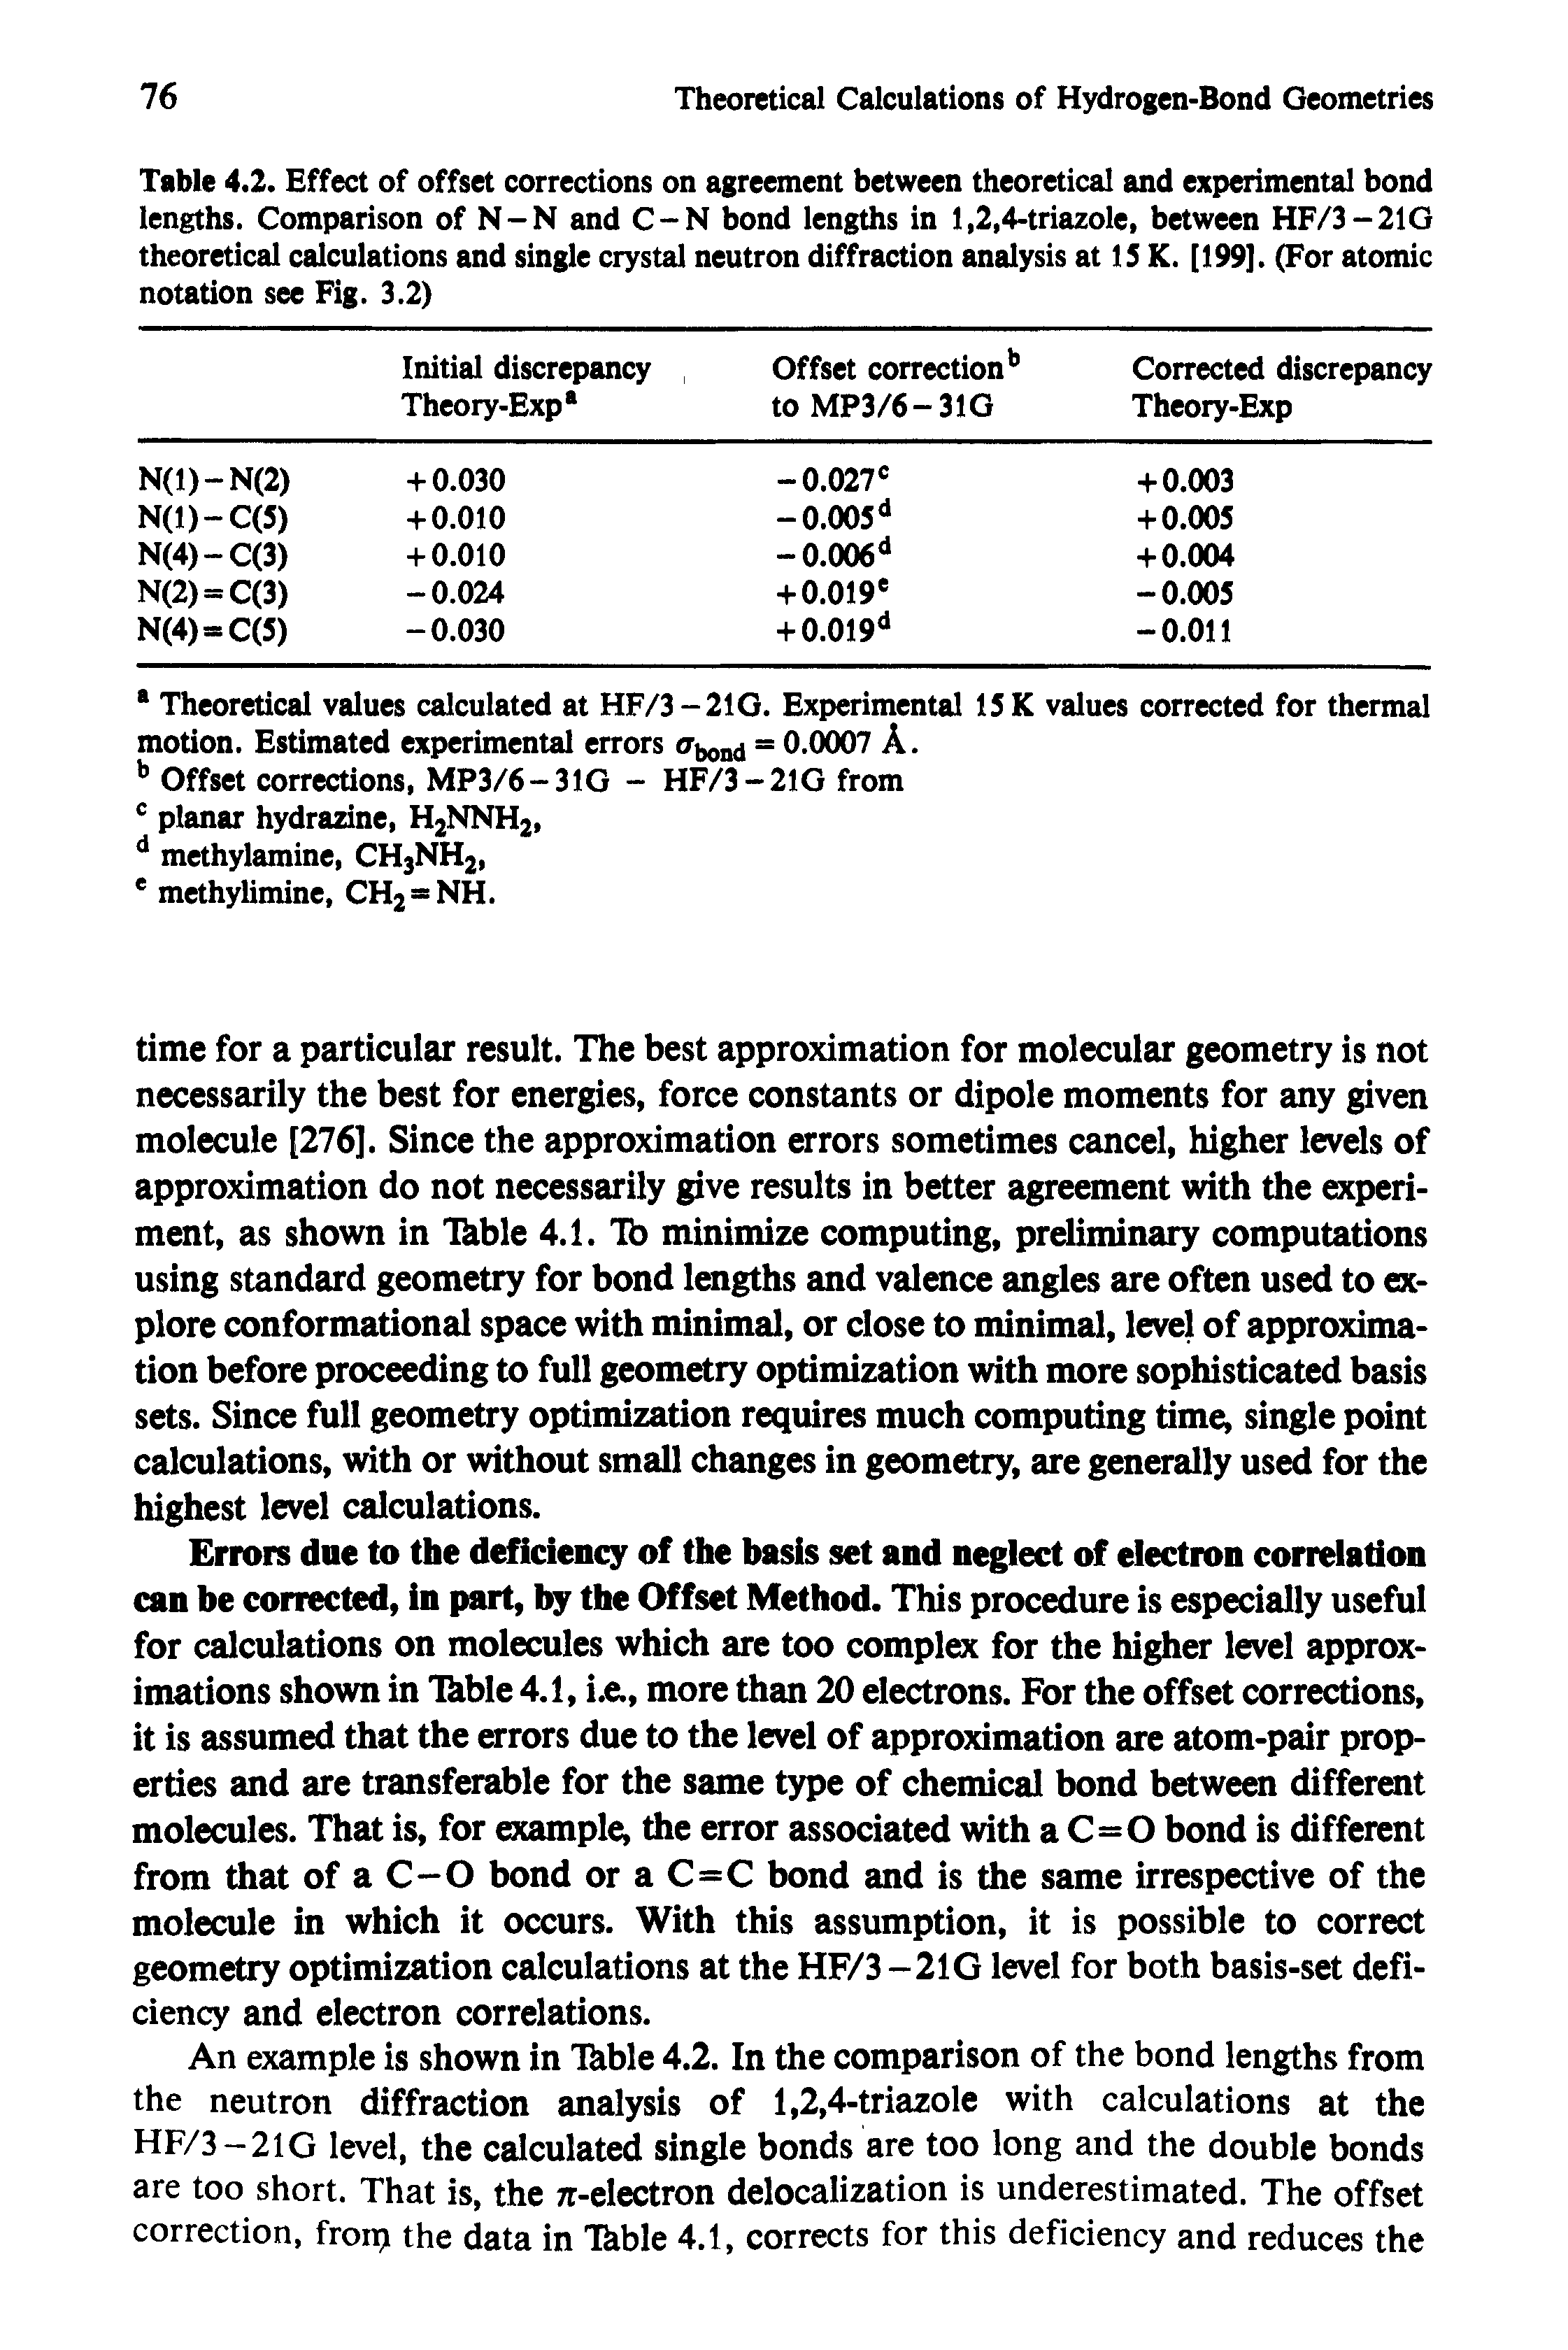 Table 4.2. Effect of offset corrections on agreement between theoretical and experimental bond lengths. Comparison of N-N and C-N bond lengths in 1,2,4-triazole, between HF/3-21G theoretical calculations and single crystal neutron diffraction analysis at 15 K. [199]. (For atomic notation see Fig. 3.2)...